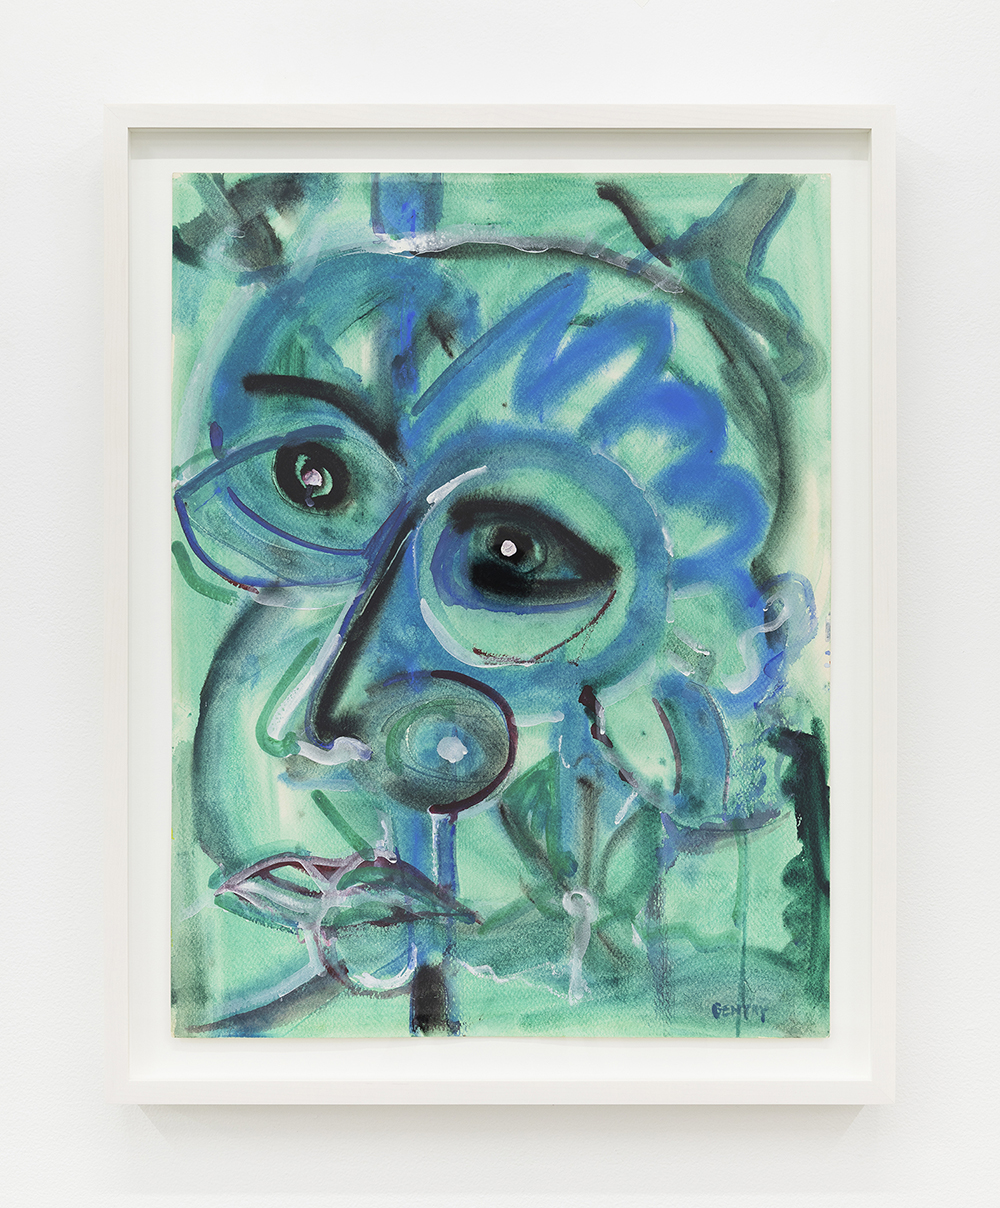 Herbert Gentry Untitled Green Face, 1987 Watercolor on paper Paper Dimensions: 23 1/2 x 18 inches (59.7 x 45.7 cm) Framed Dimensions: 27 x 21 1/2 inches (68.6 x 54.6 cm)